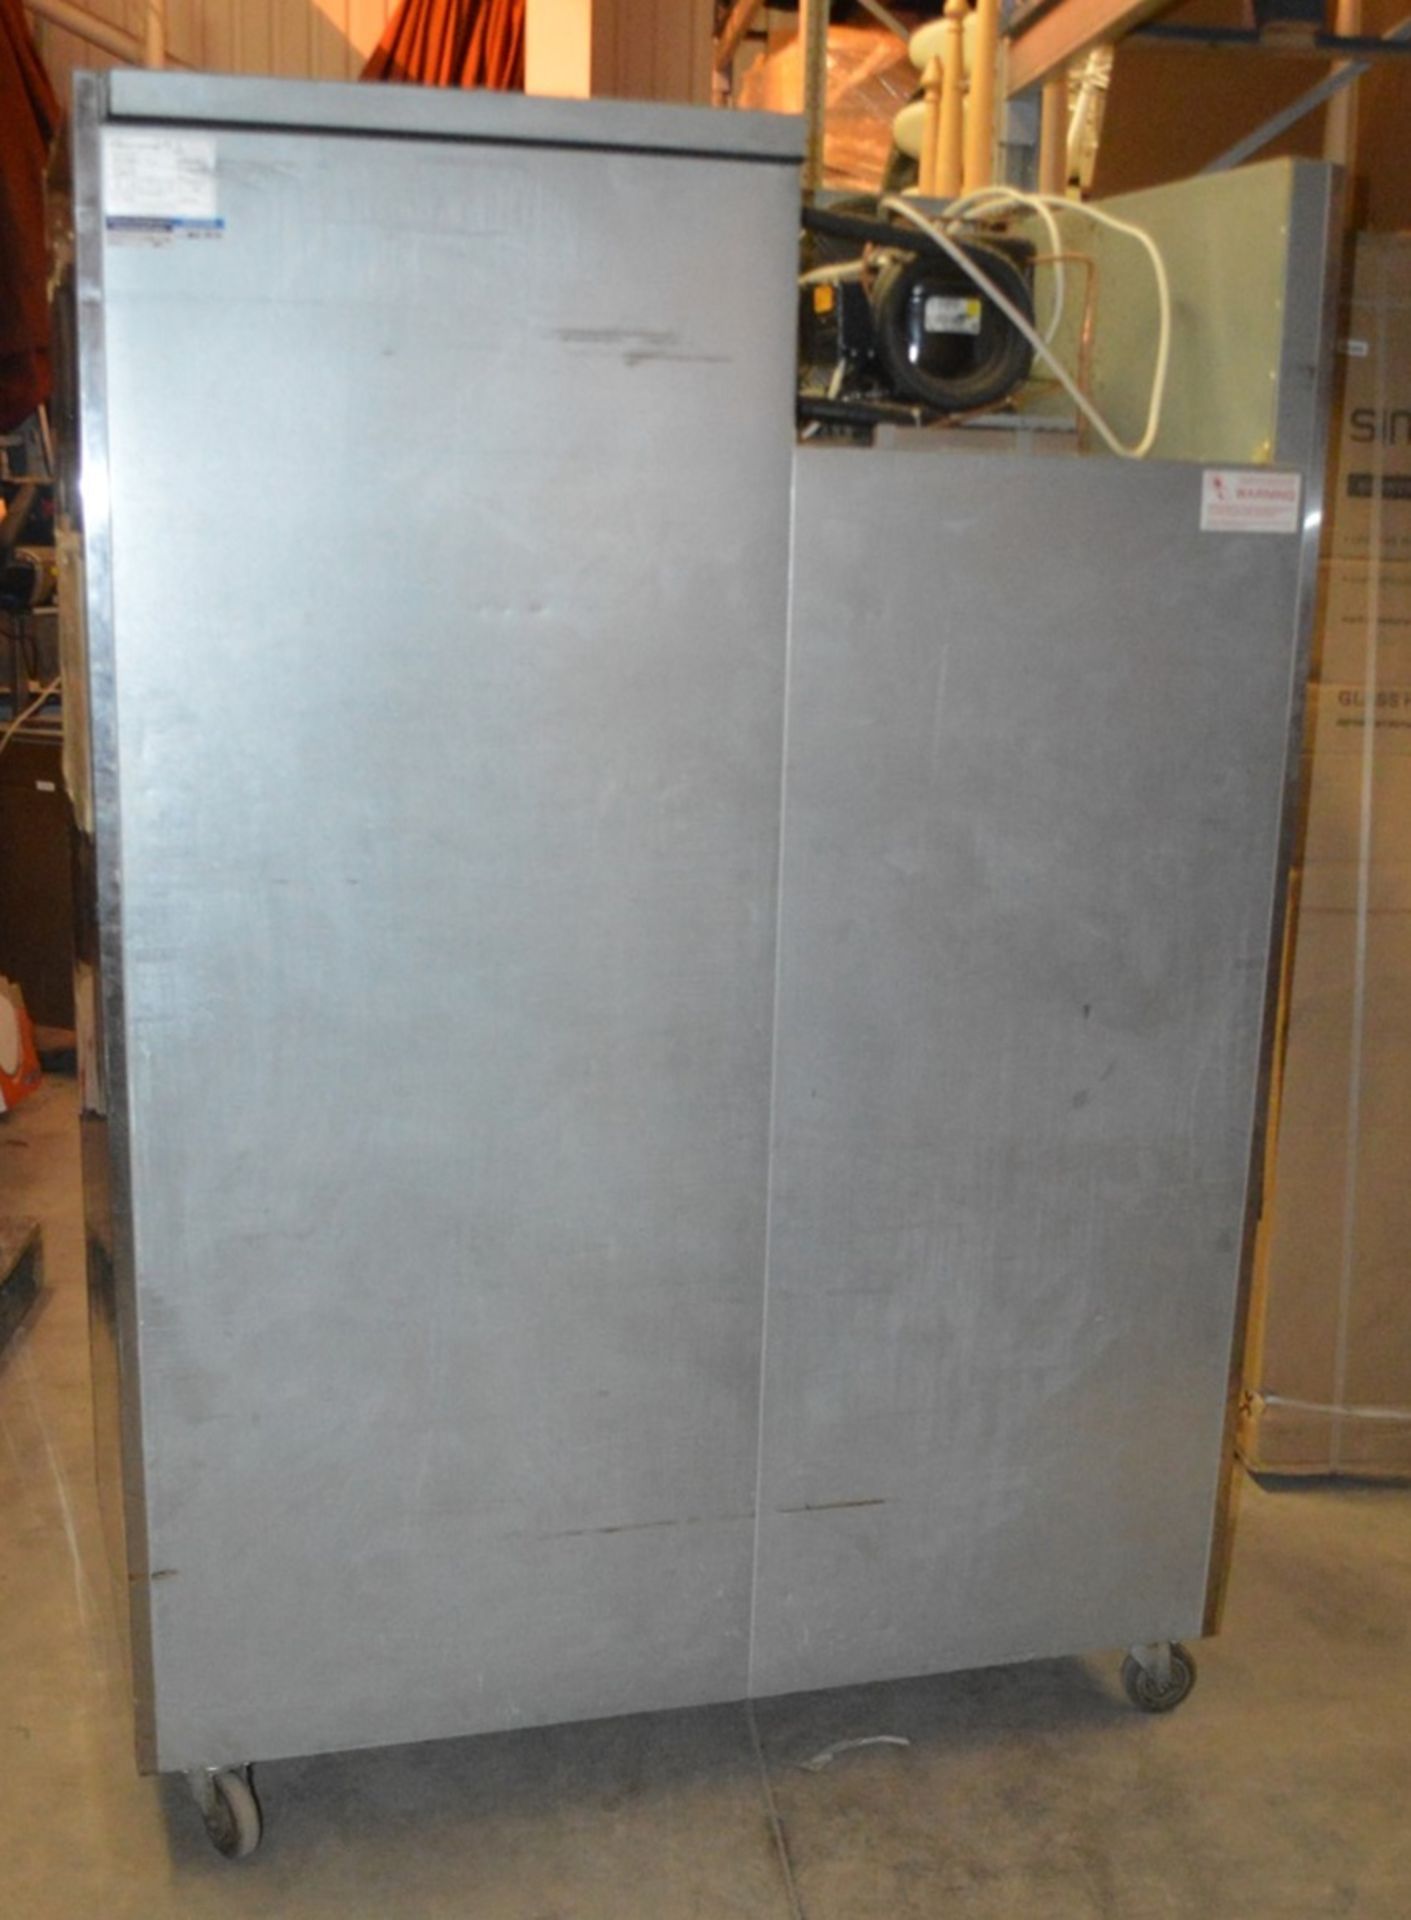 1 x WILLIAMS Upright 2-Door Stainless Steel Commercial Chiller Unit - Dimensions: H195 x W140 x - Image 3 of 12